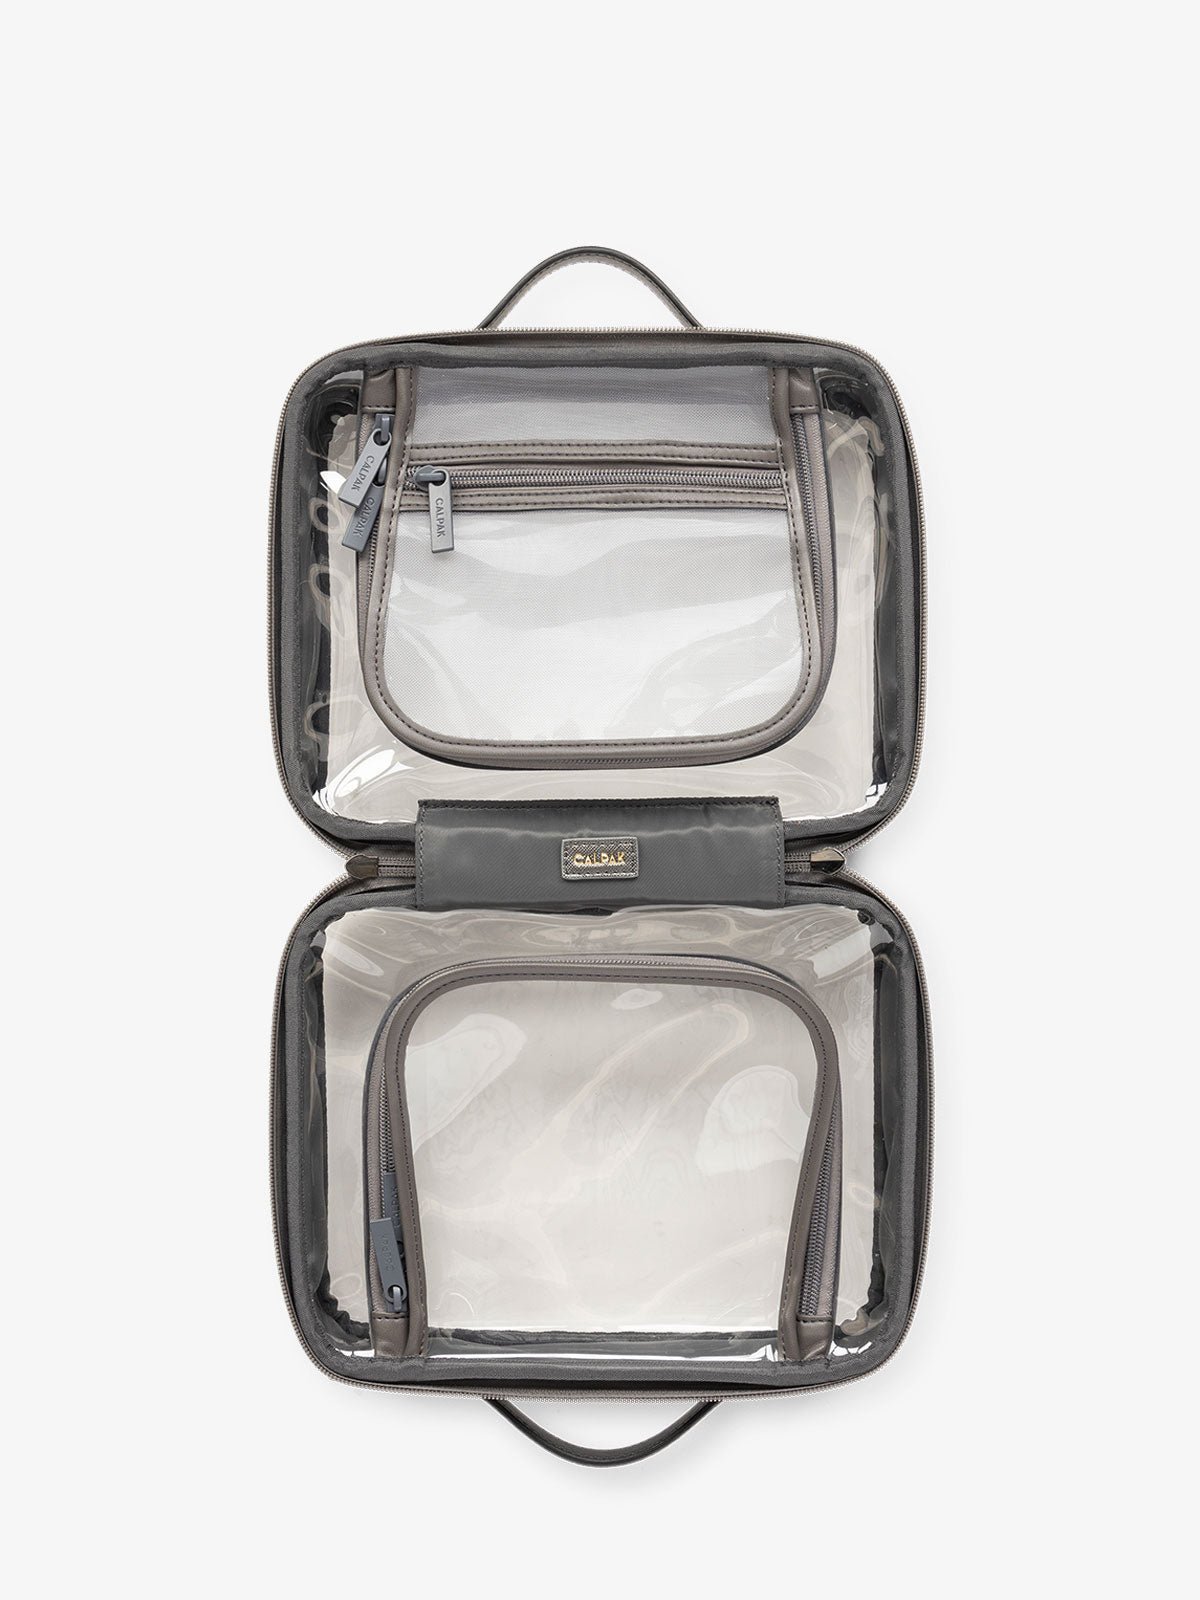 CALPAK clear travel makeup bag with zipper enclosed compartments in metallic steel